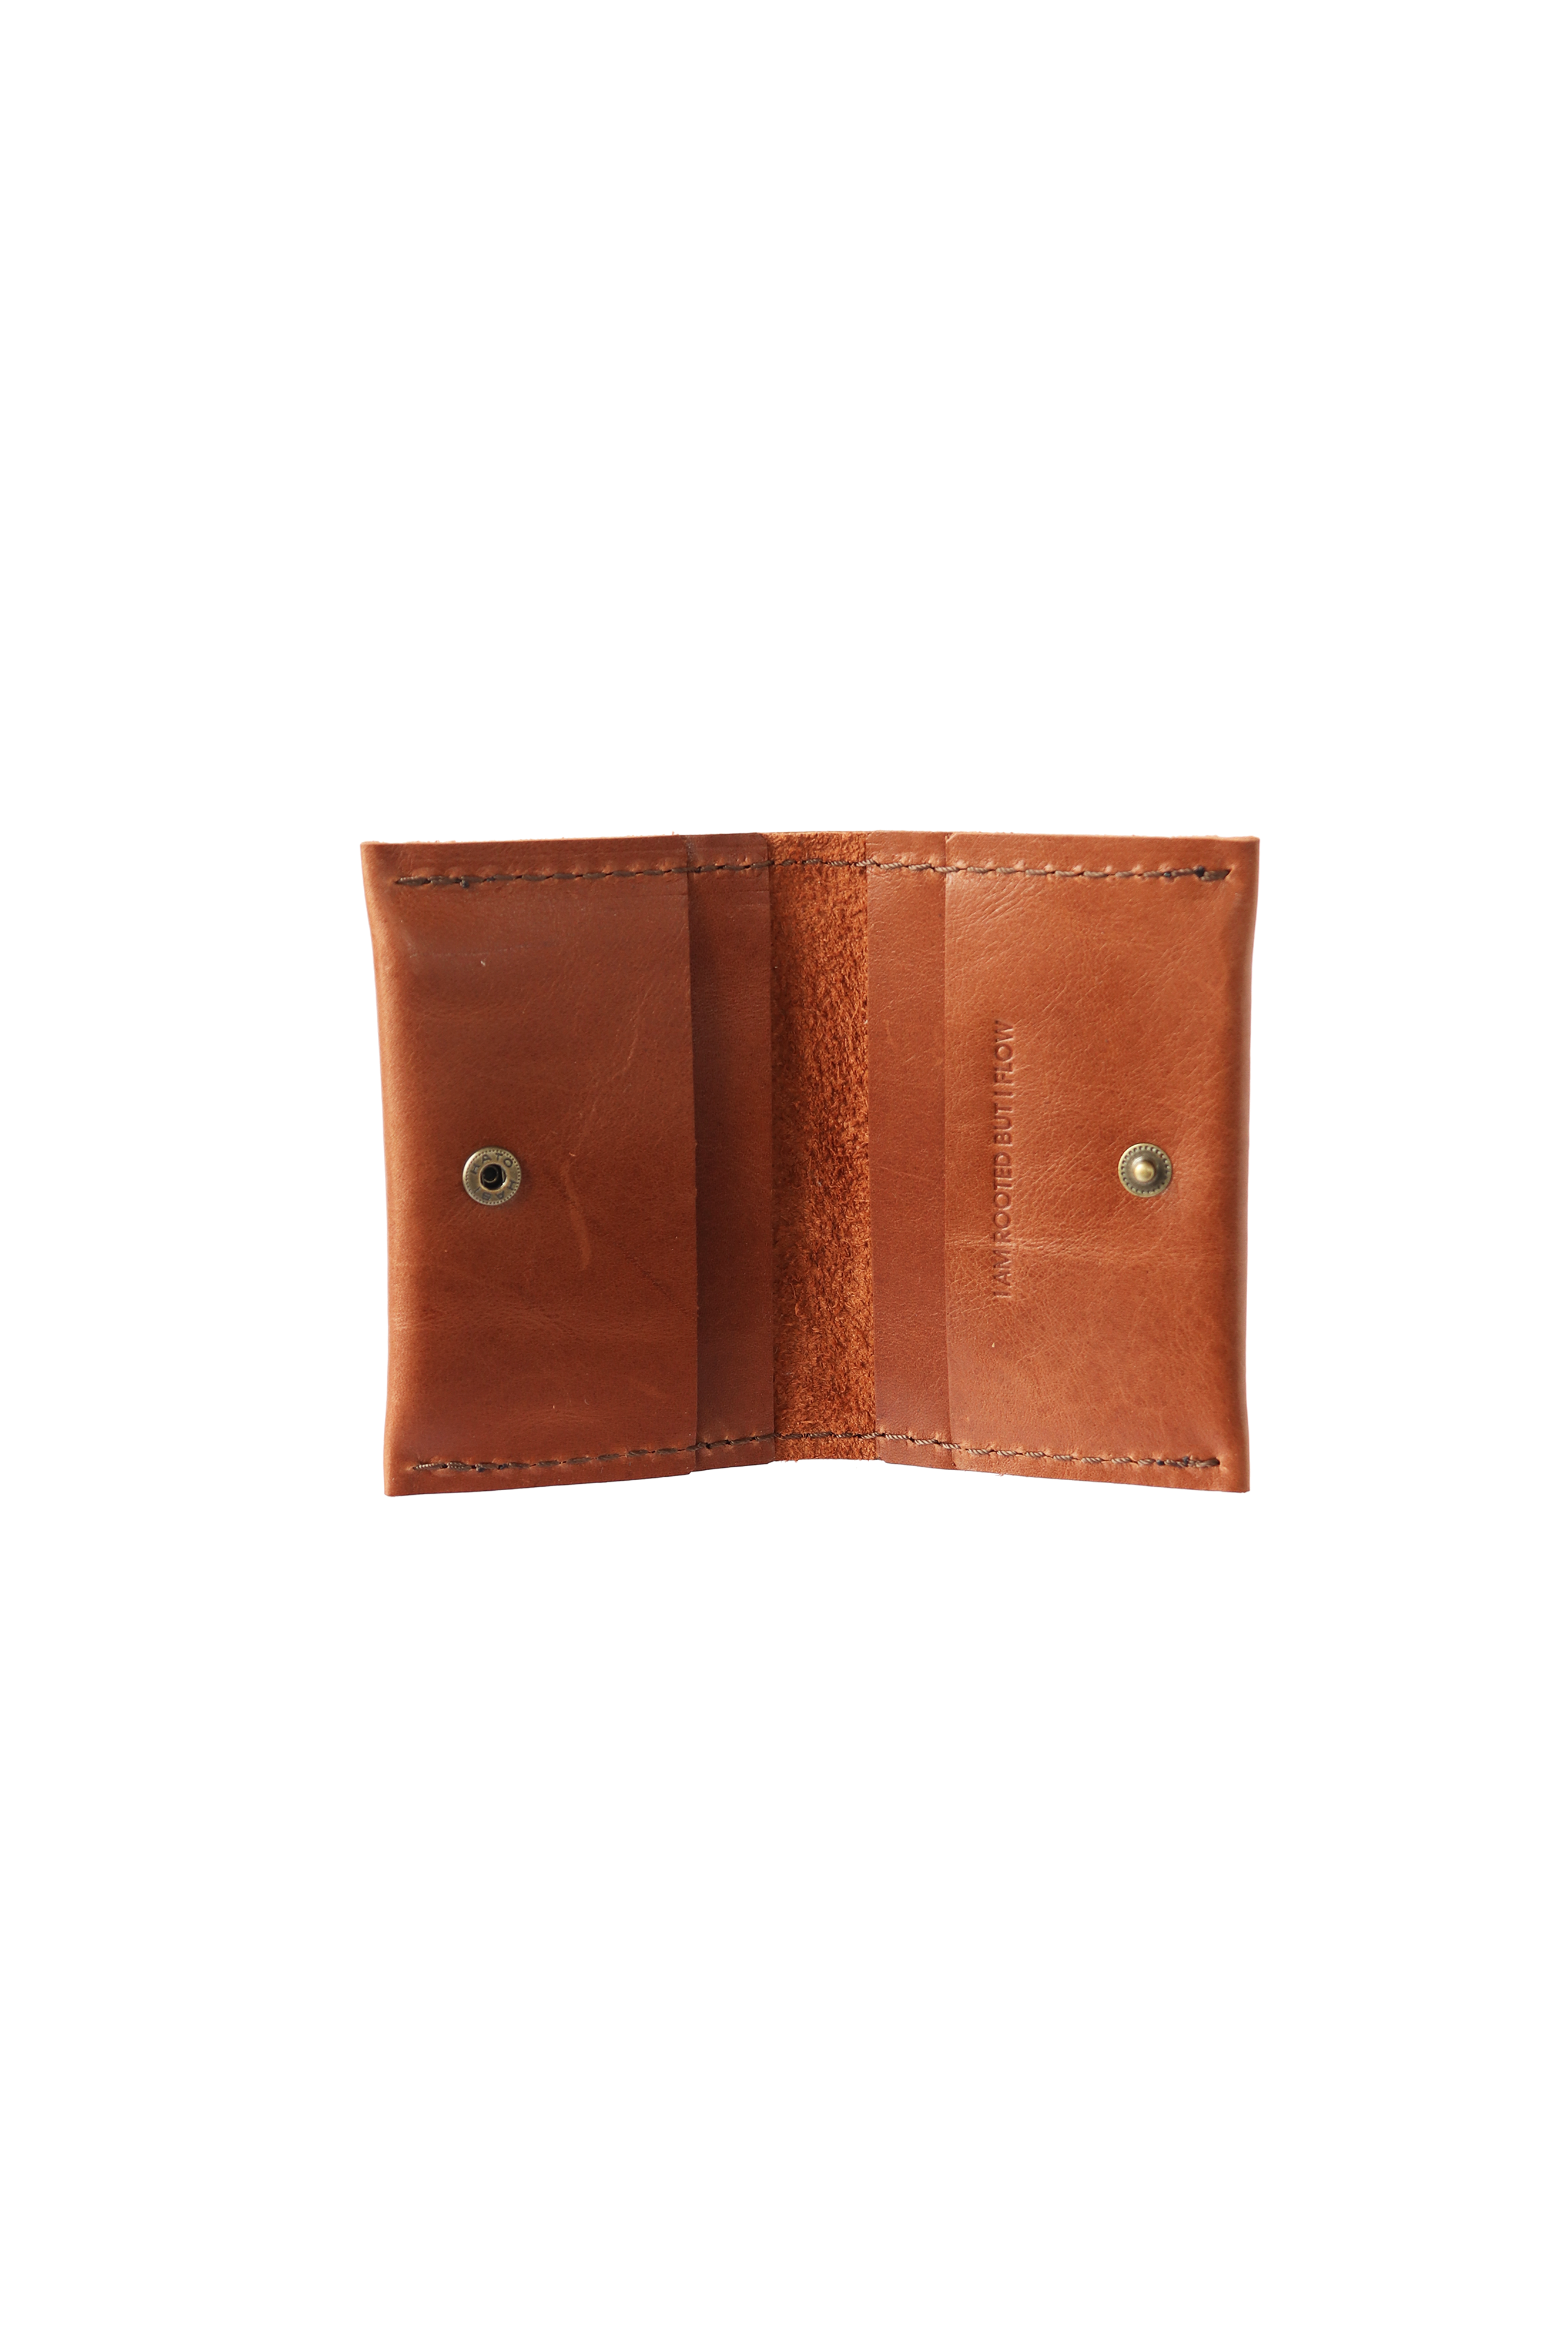 Small Fortune Leather Wallet in Terra Tan